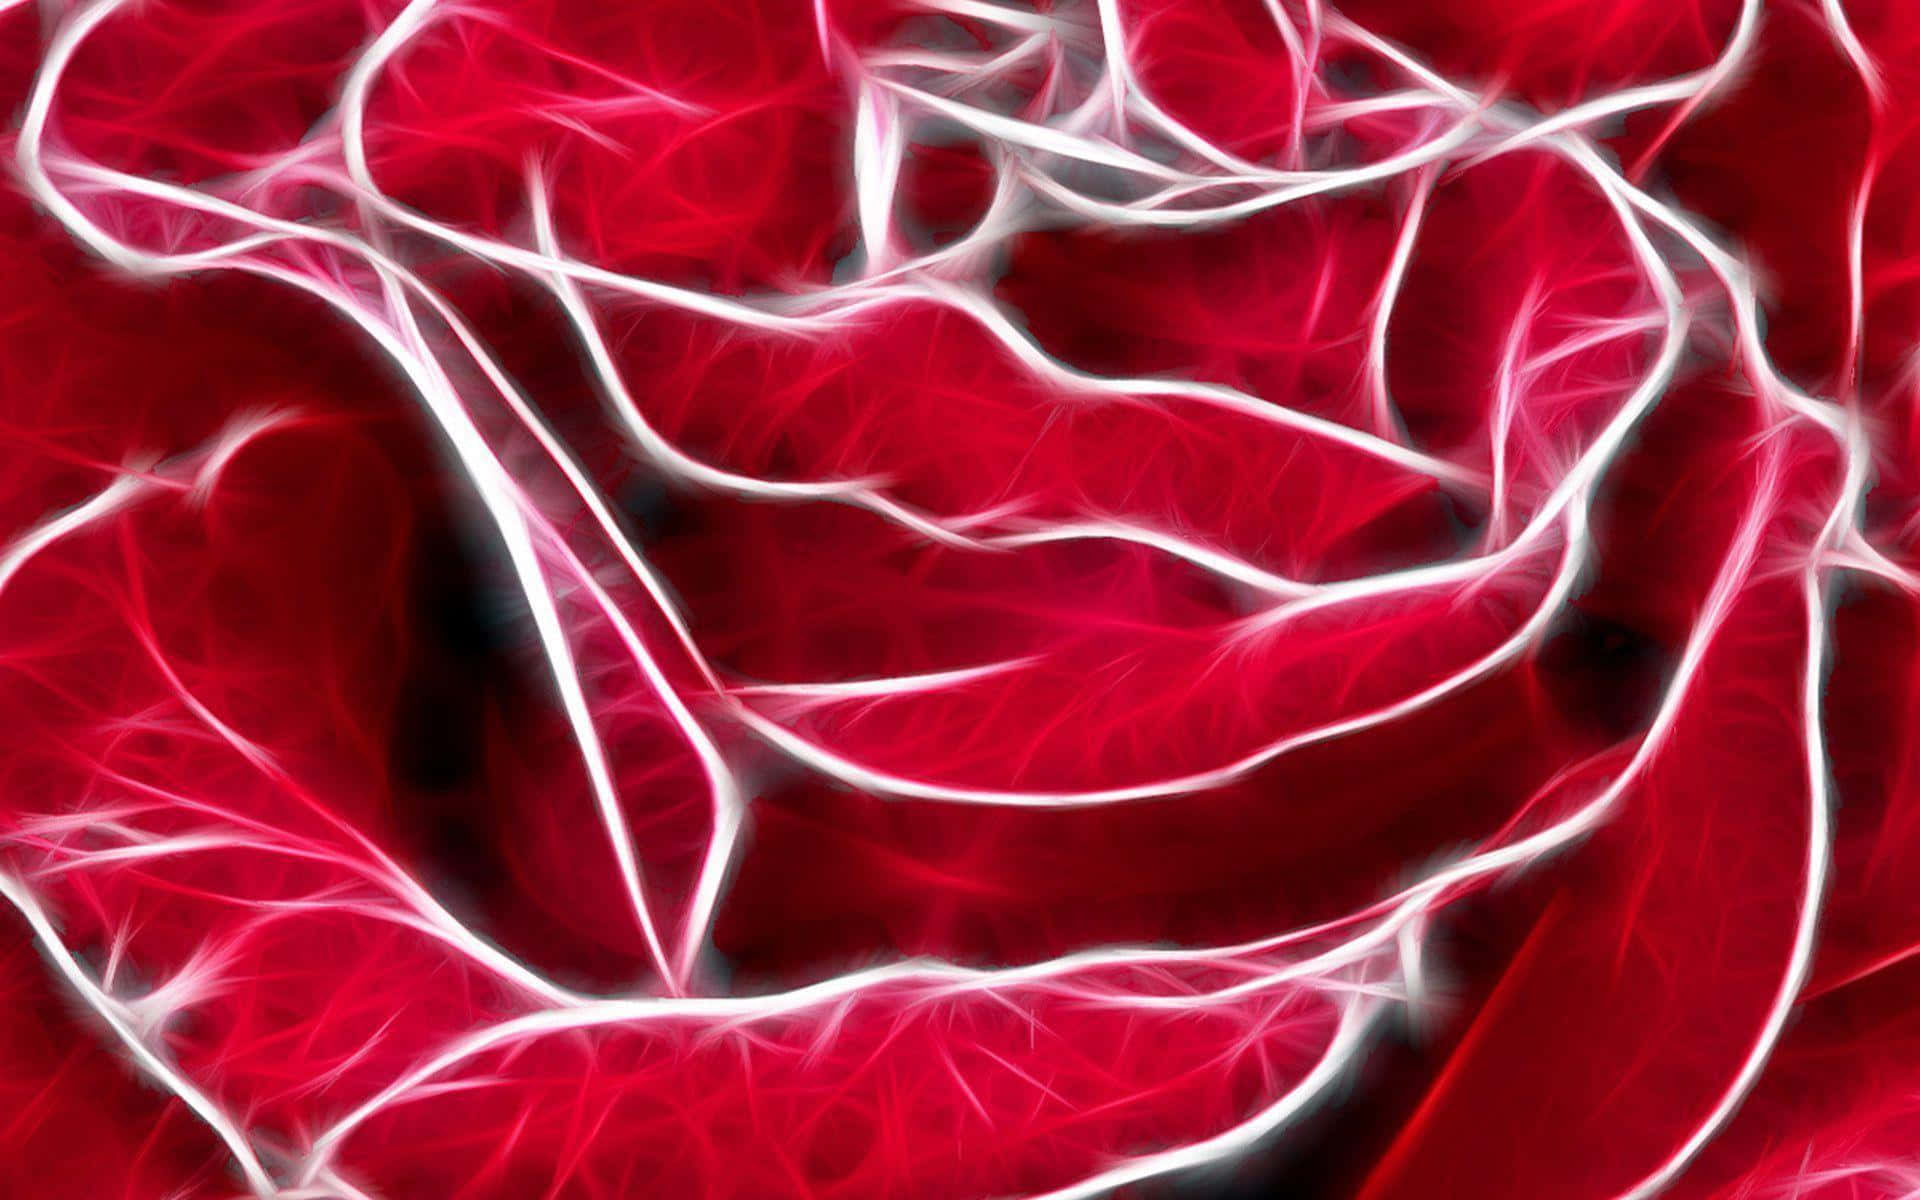 Brighten up your space with a vibrant red neon background